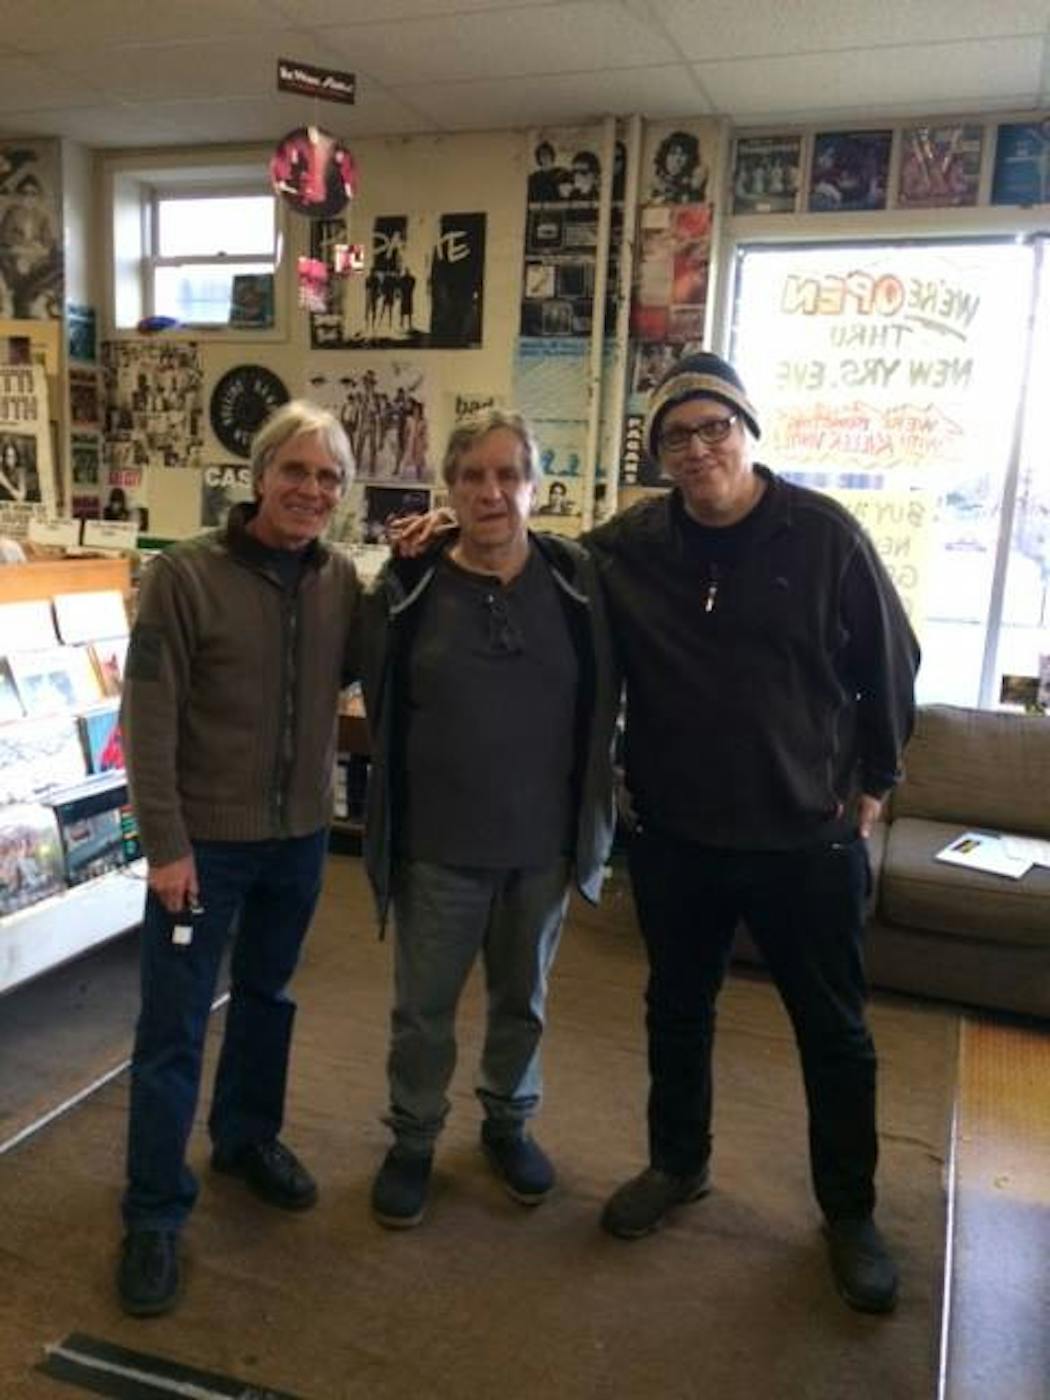 Former Oar Folkjokeopus store operators Peter Jesperson, left, Vern Sanden and Mark Trehus reunited in the space in 2017 ahead of Treehouse Records' closure.